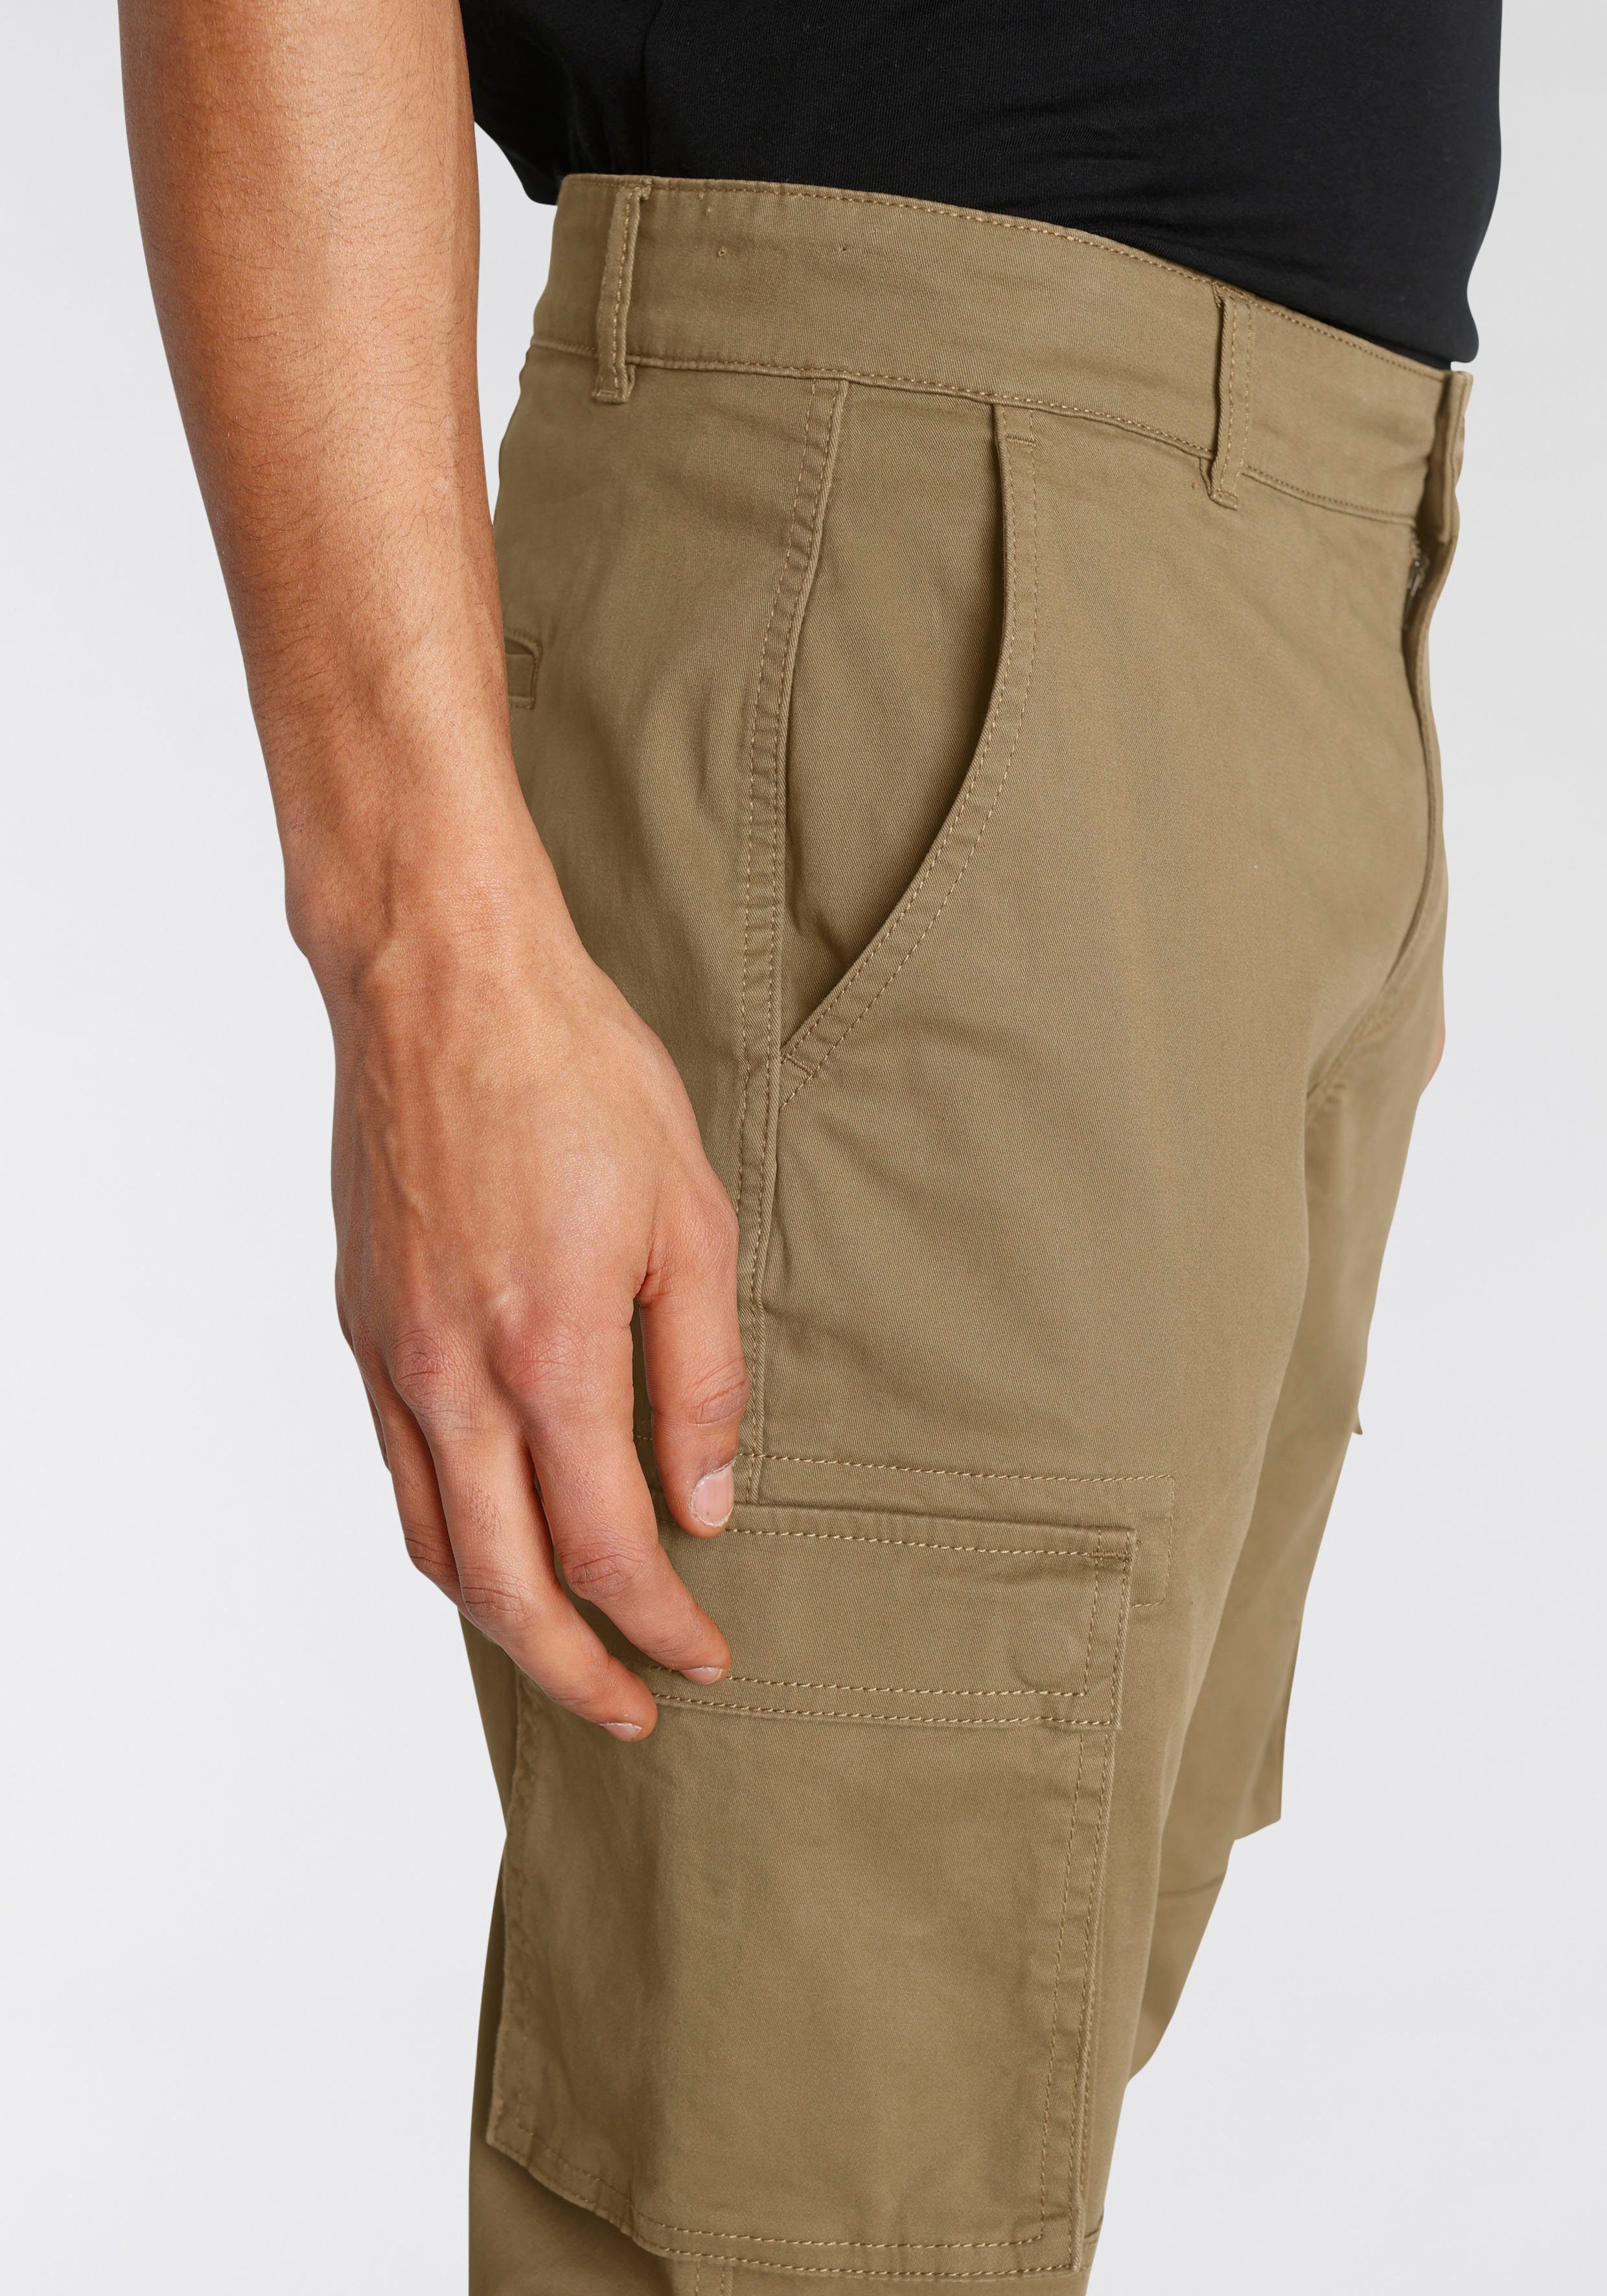 ONLY & SONS Cargohose STAGE CAM CARGO beige CUFF